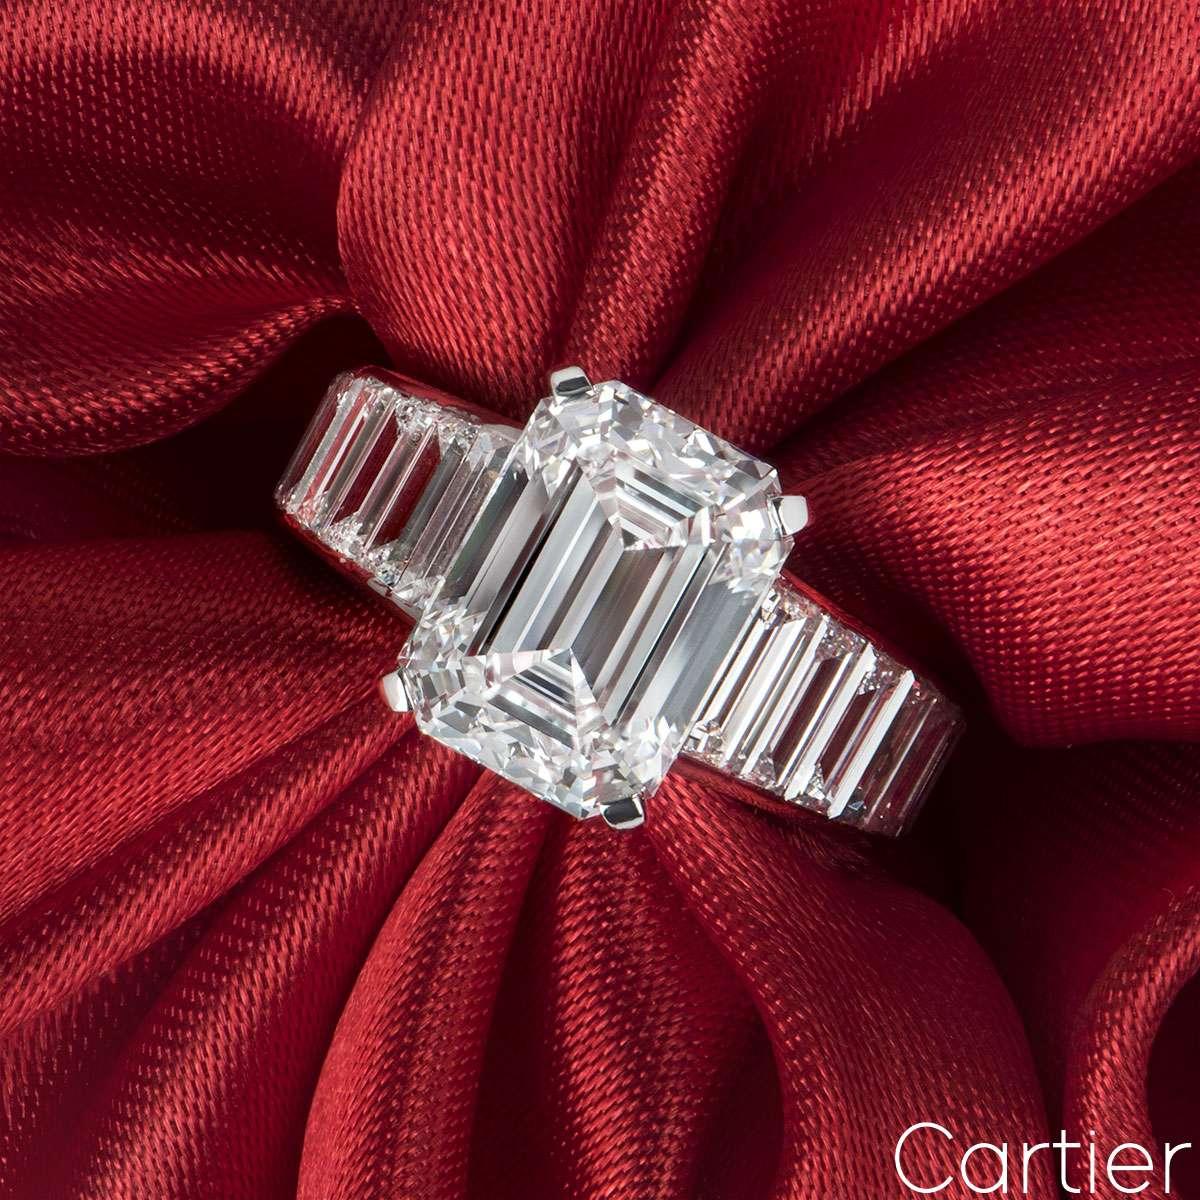 RRP for this ring is £500,000.  A stunning emerald cut diamond ring by Cartier in platinum. The ring is set to the centre with a 4.12ct diamond, E colour and VVS2 clarity. Complimenting the central diamond are 18 baguette cut diamond set shoulders